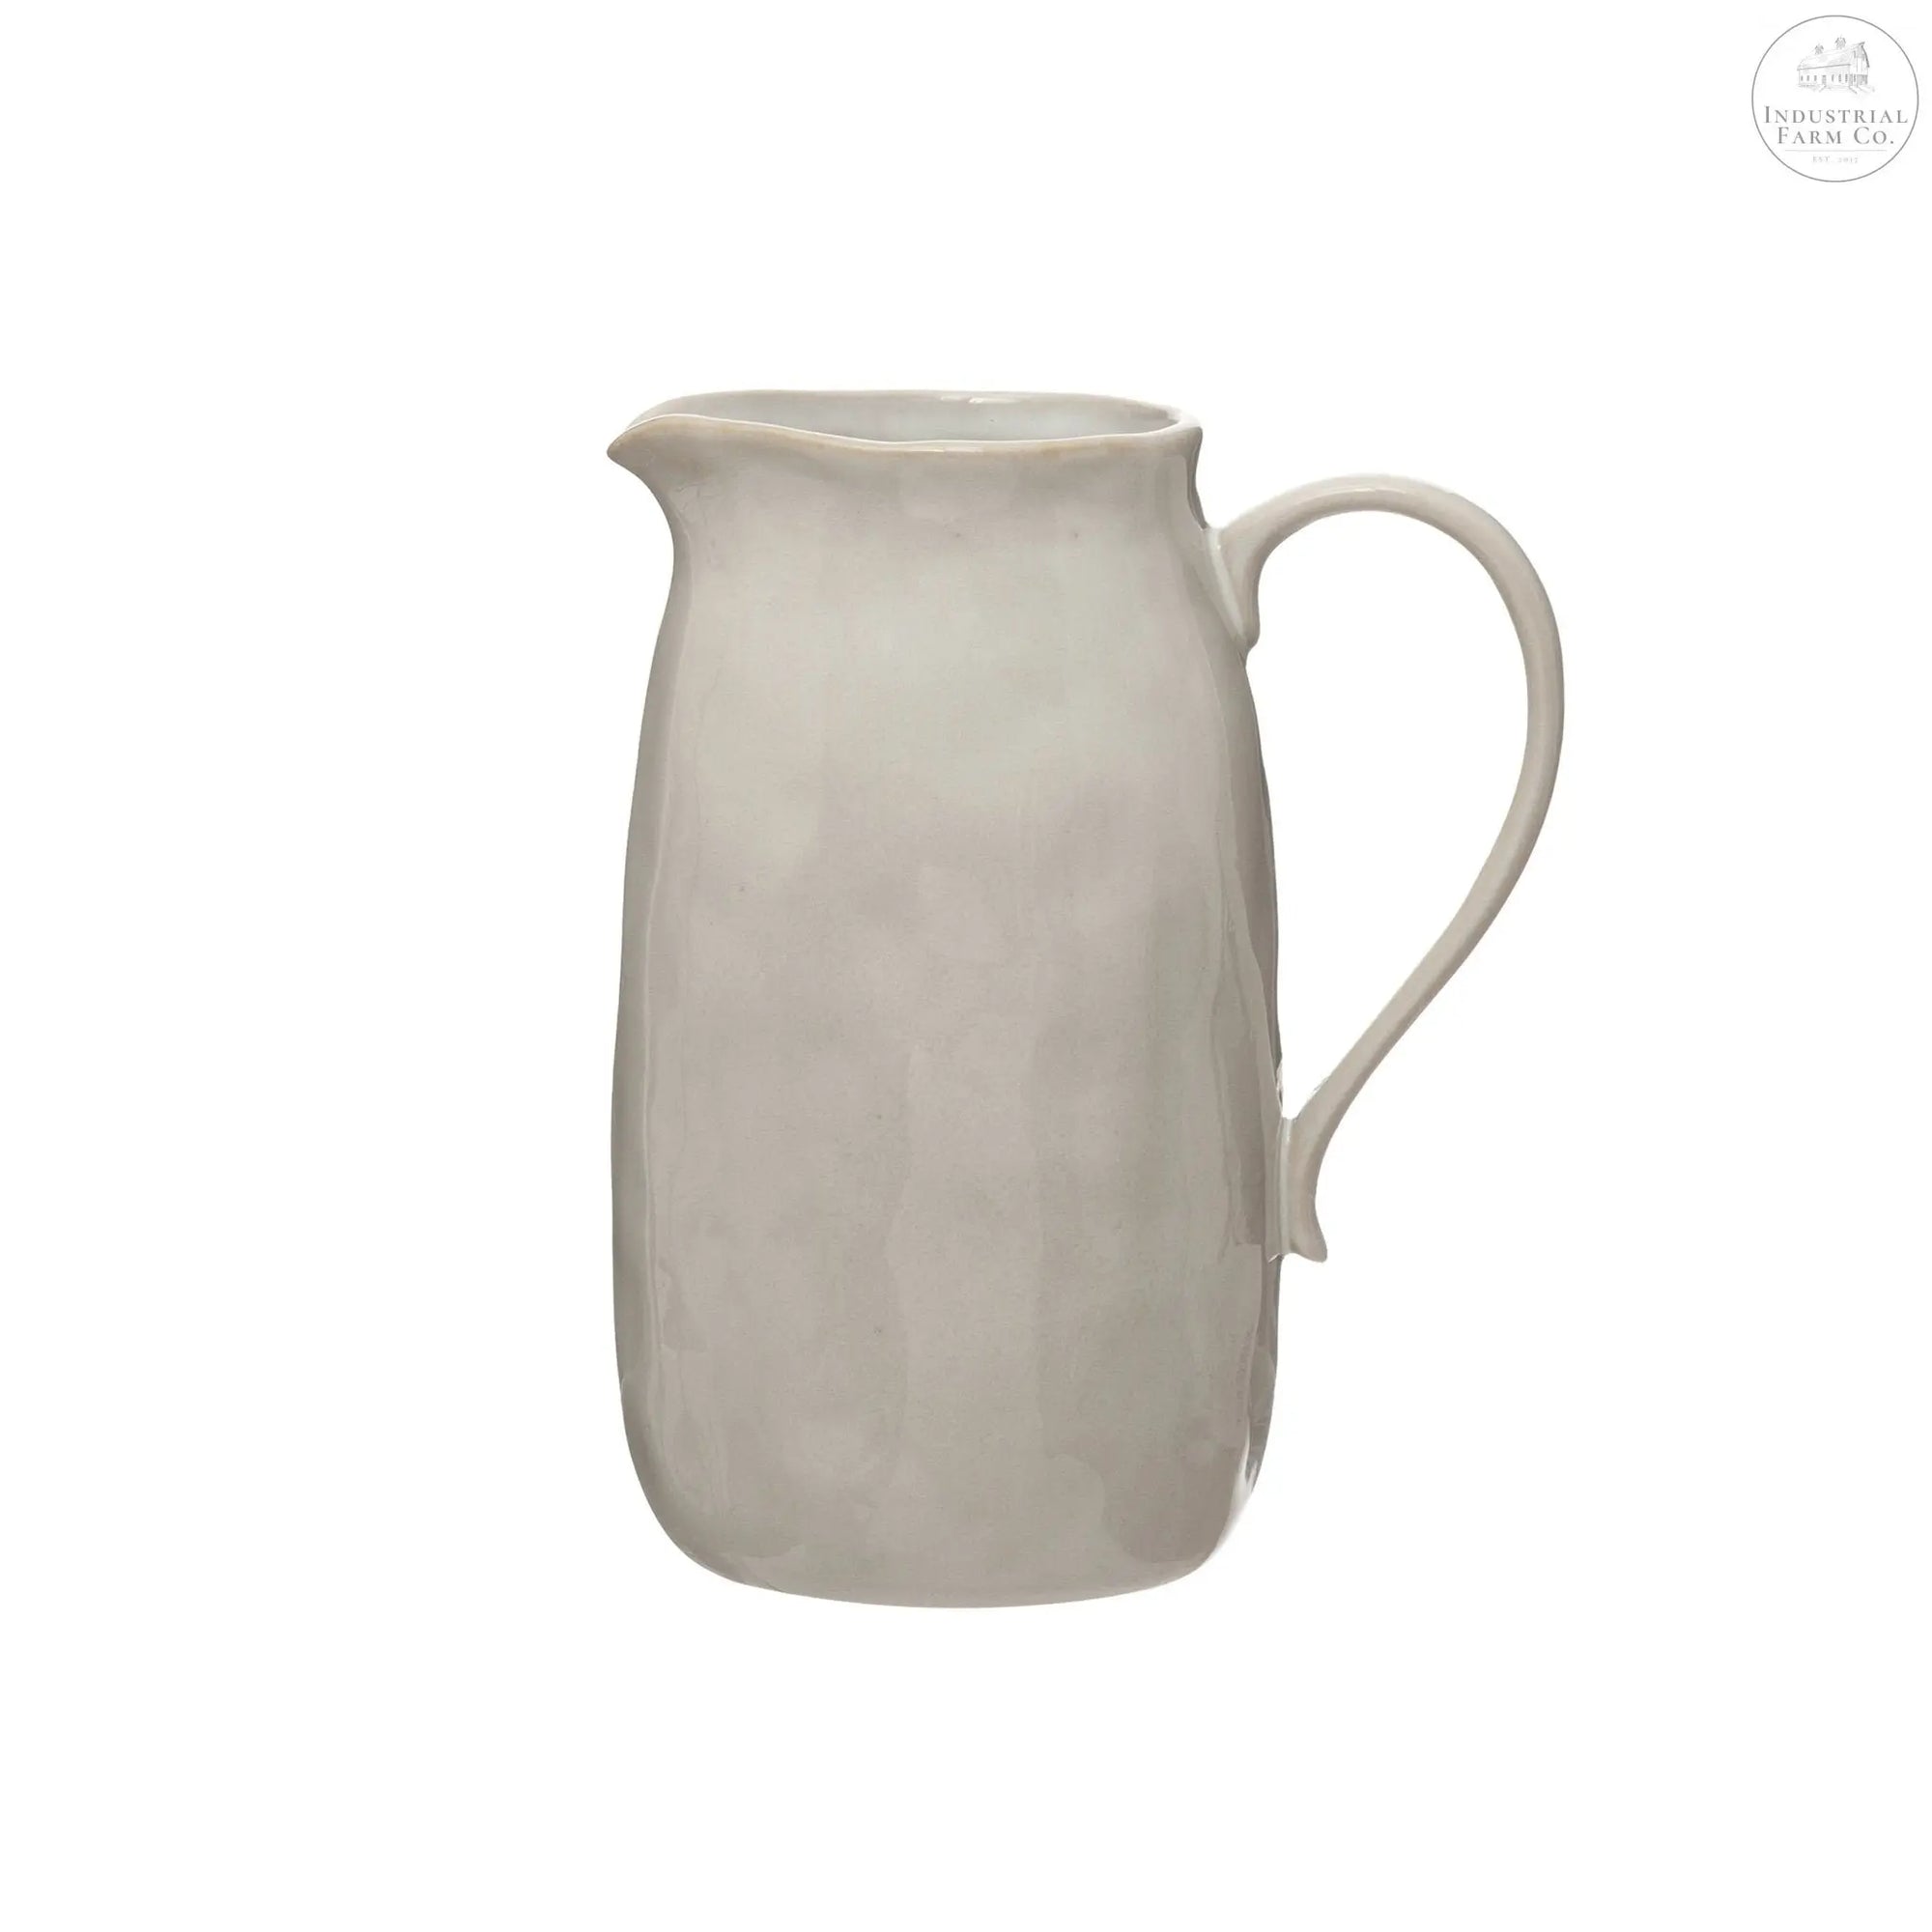 The Lilly Stoneware Pitcher Serving Pitchers & Carafes    | Industrial Farm Co